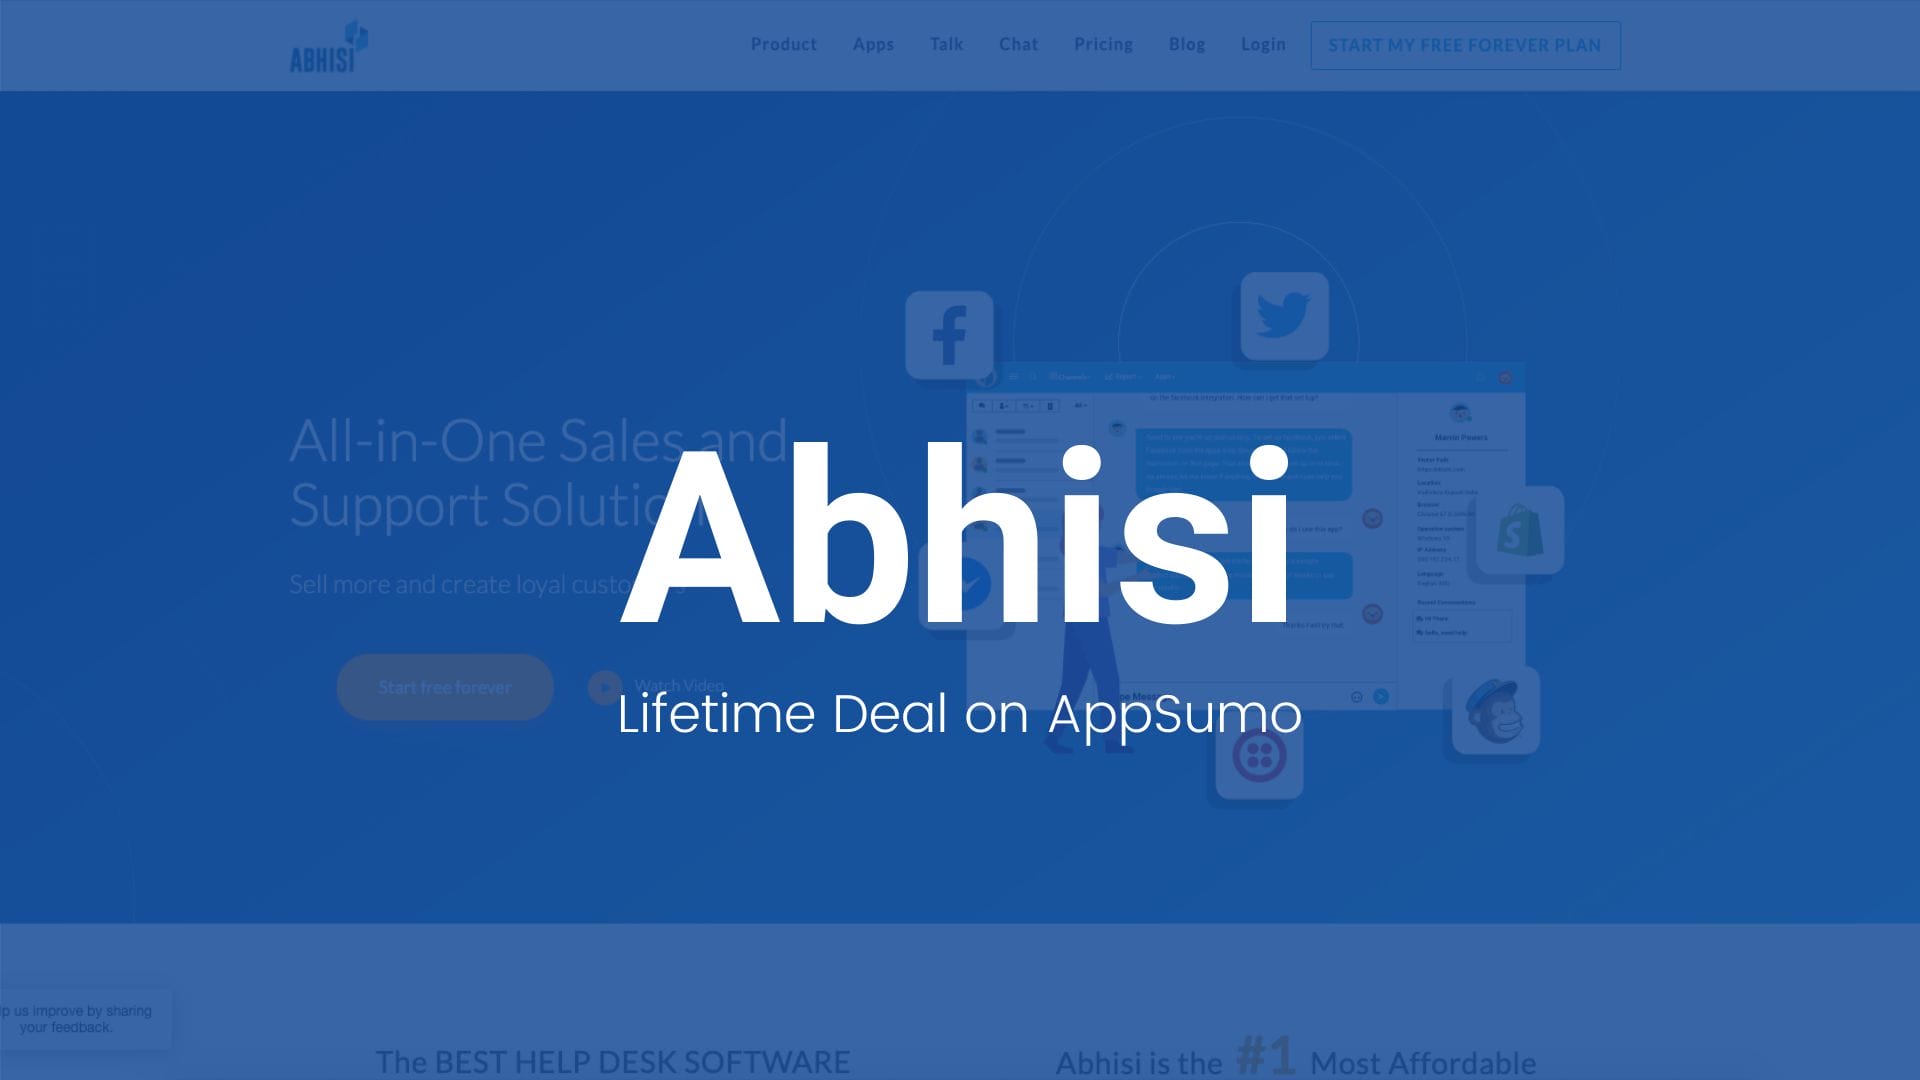 Abhisi: All-in-One Sales Solution For Happy Customers